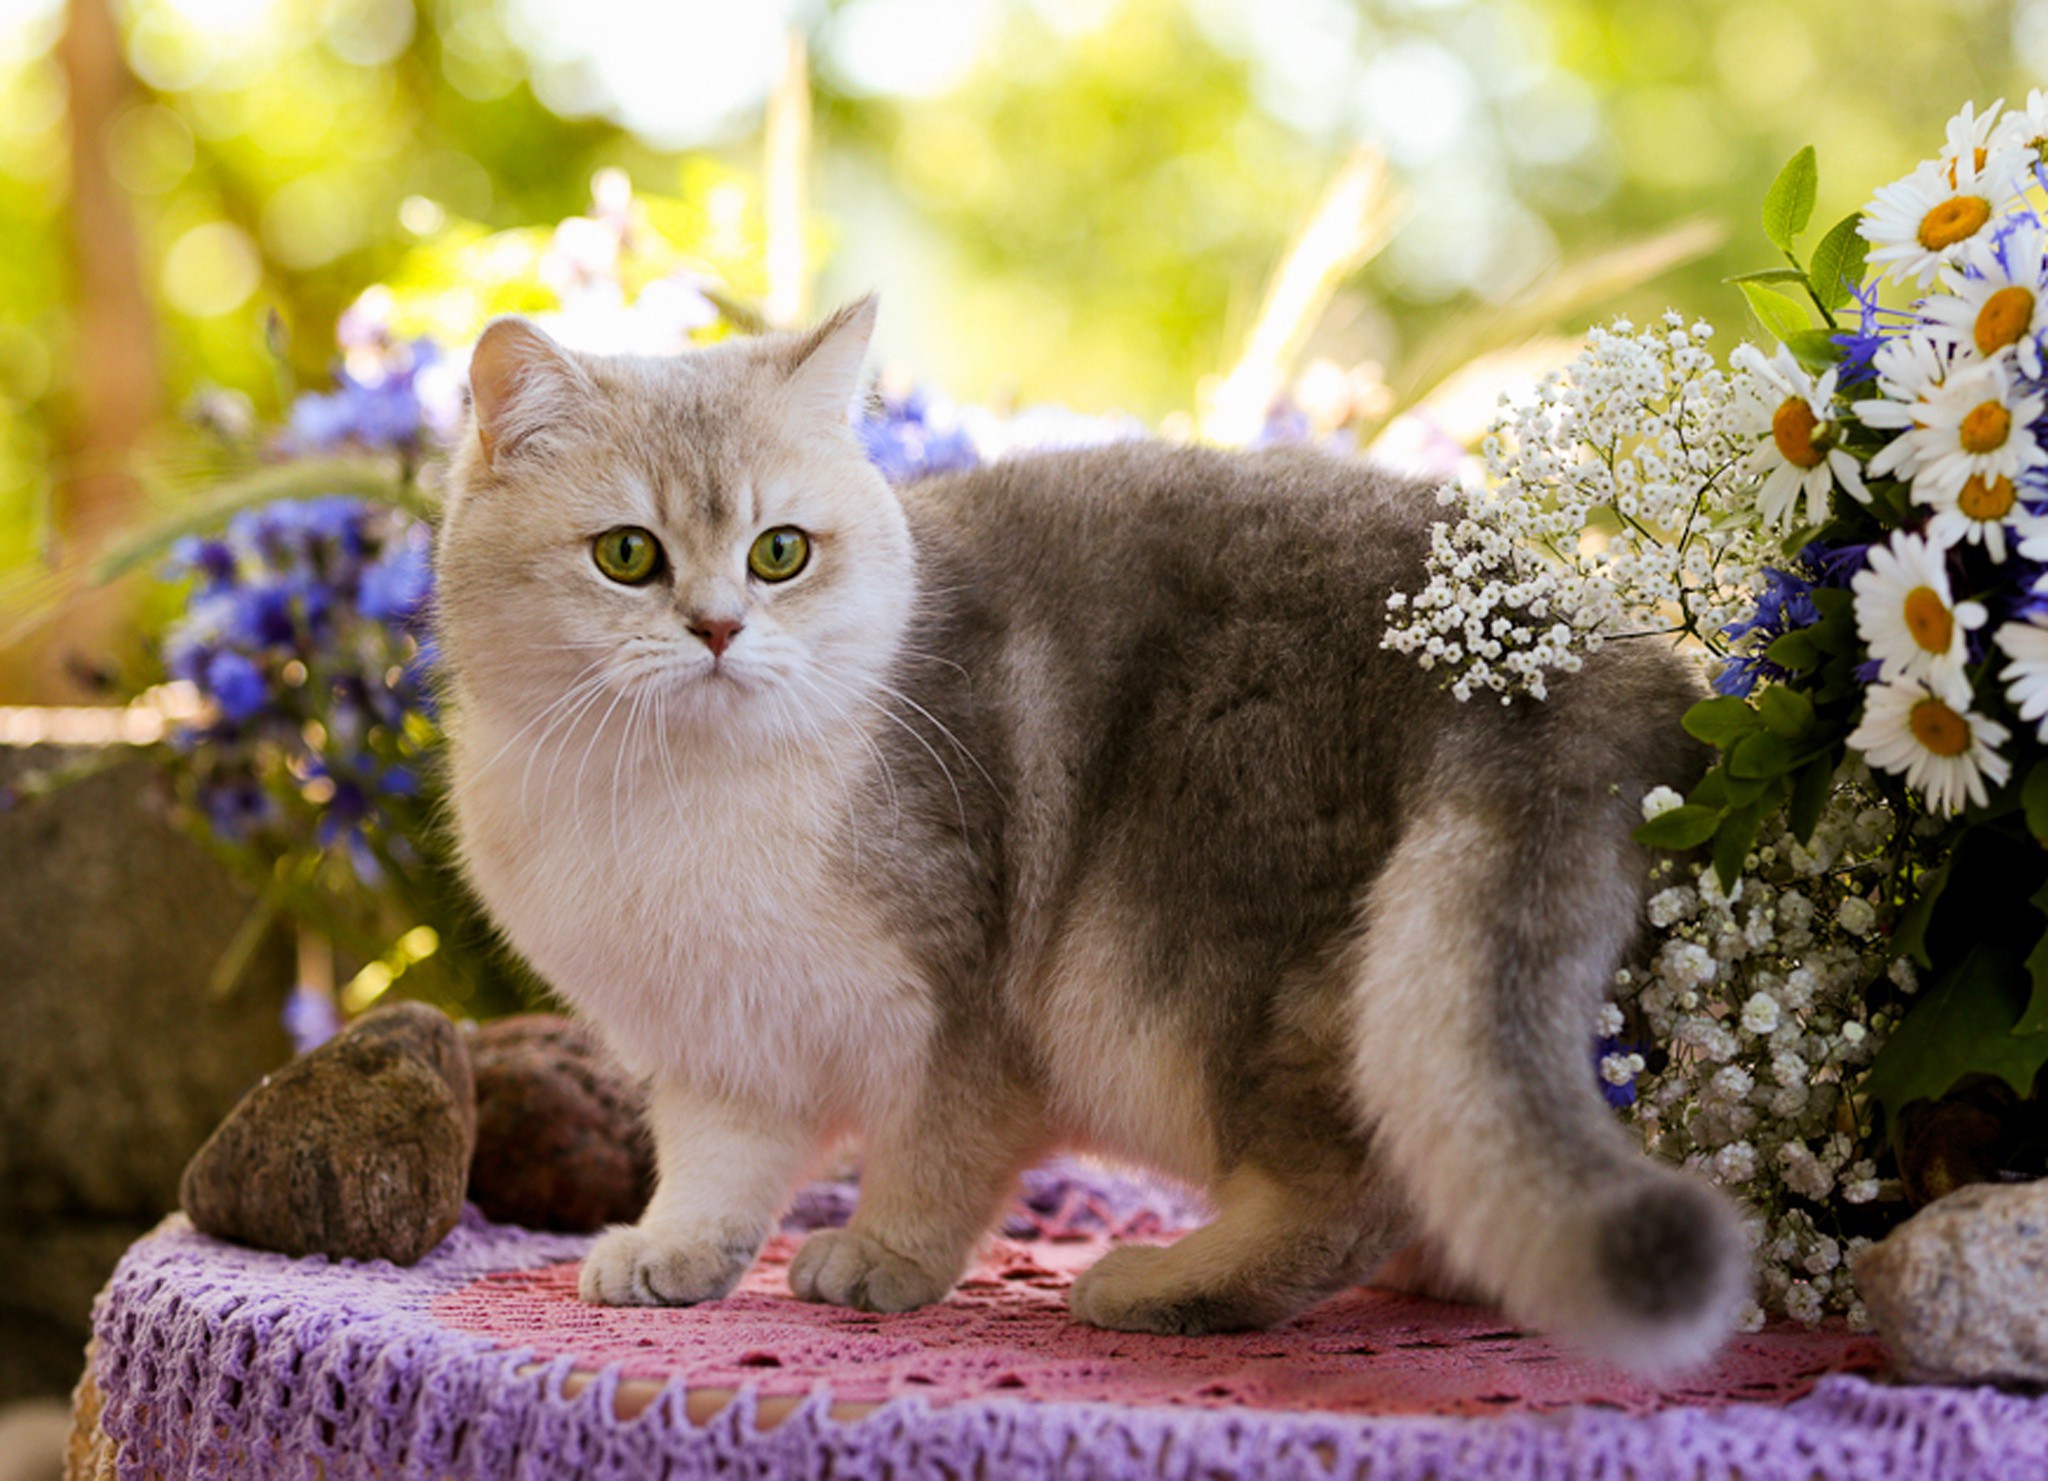 Adopting an older cat: a wise choice in Israel